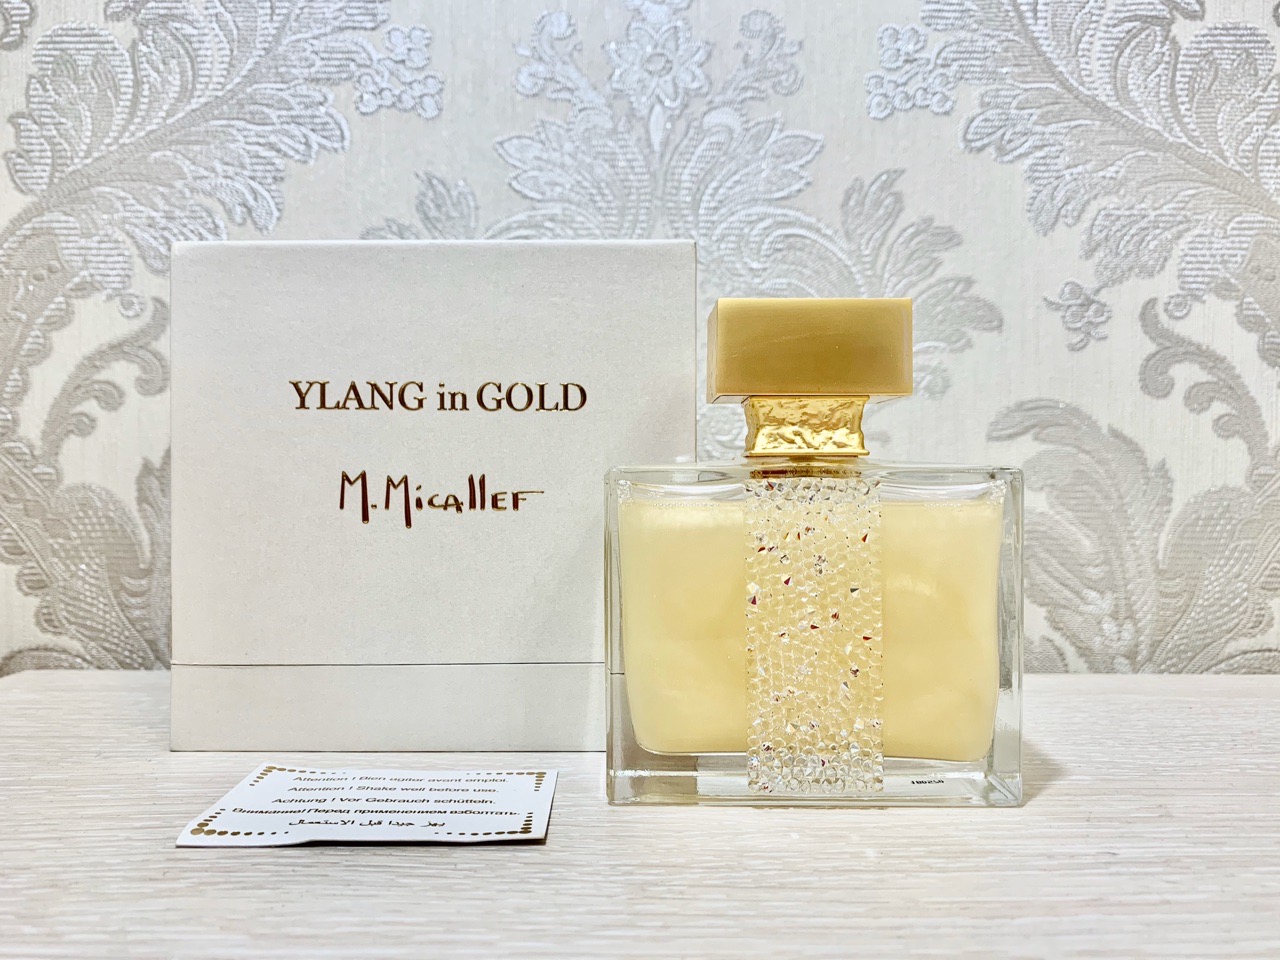 Ylang in gold. Иланг Микалефф. Иланг Голд Микалефф. M. Micallef Ylang in Gold EDP, 100 ml. M.Micallef Ylang in Gold 10ml.